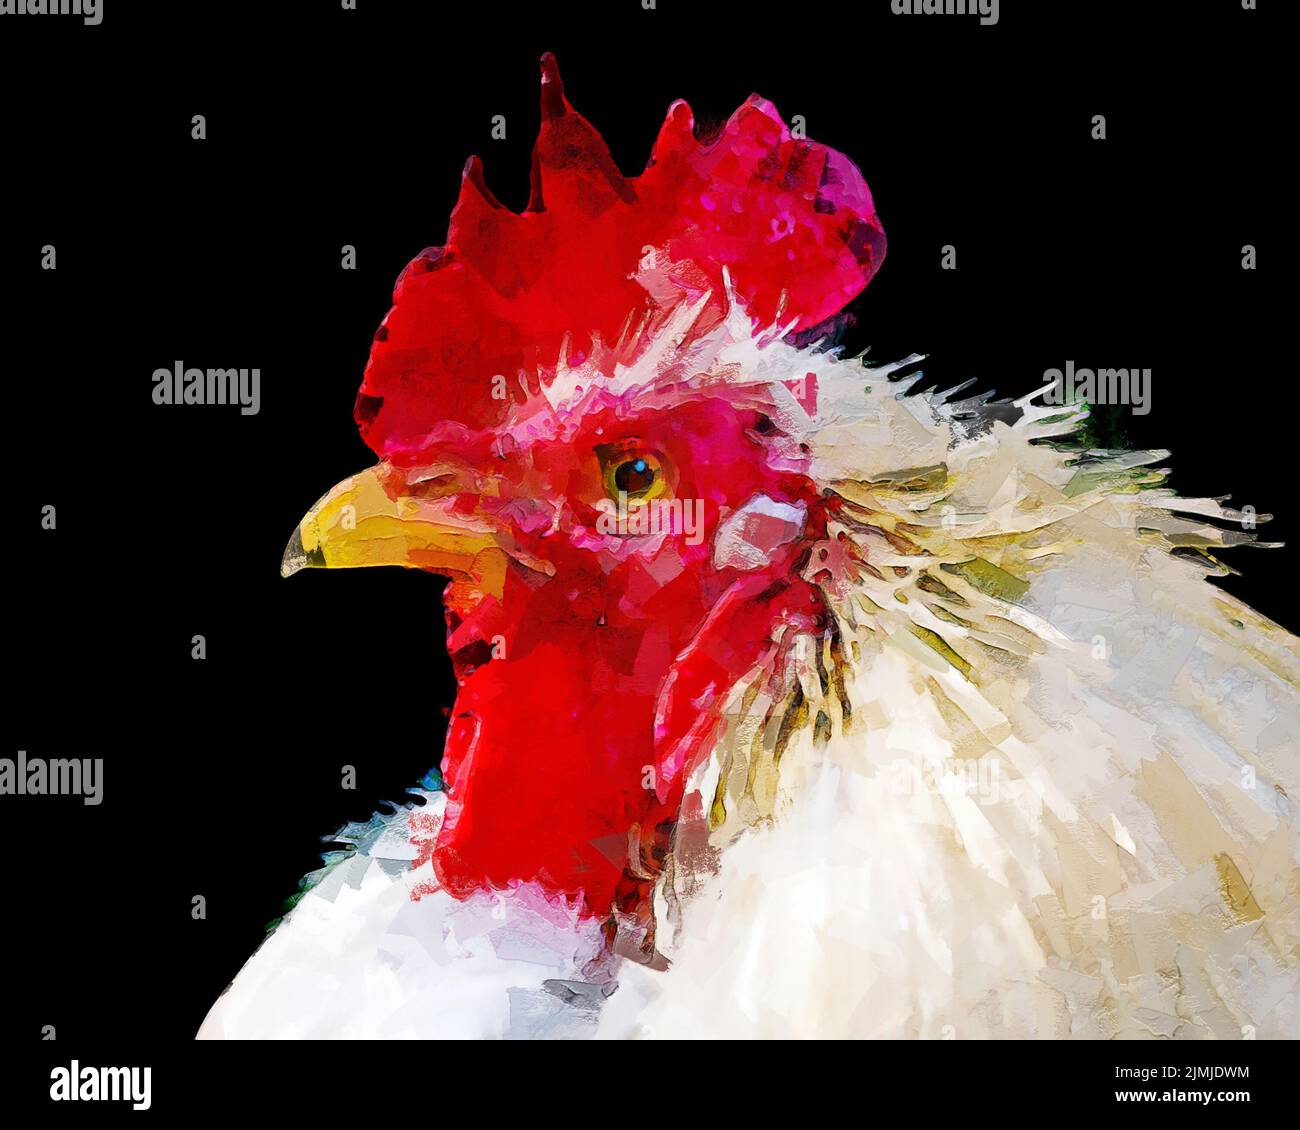 Digital painted illustration portrait of a chicken isolated on a black background Stock Photo